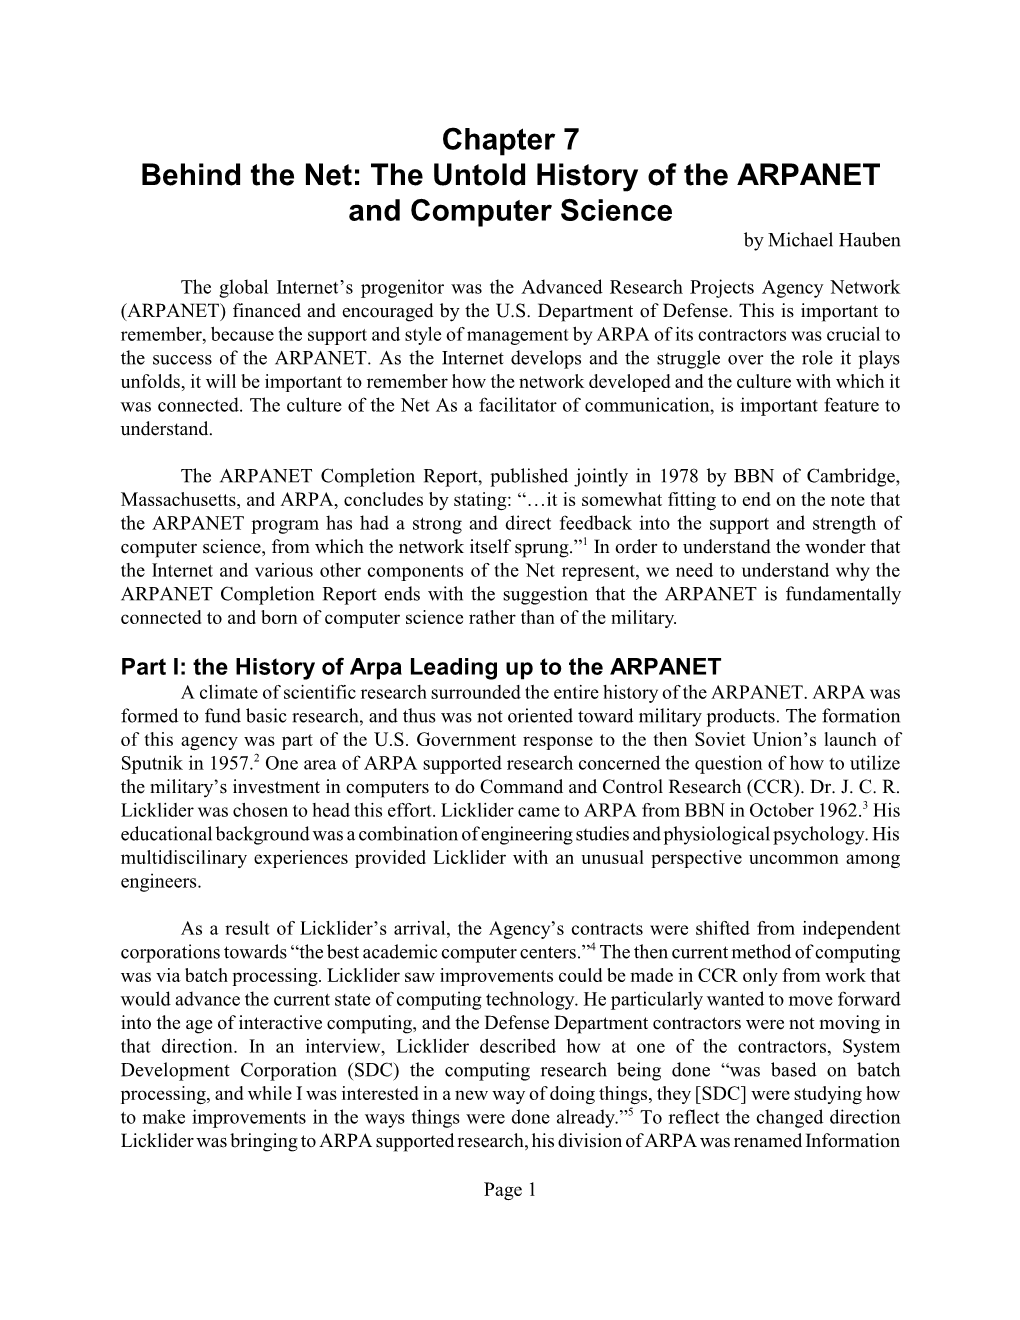 Chapter 7 Behind the Net: the Untold History of the ARPANET and Computer Science by Michael Hauben